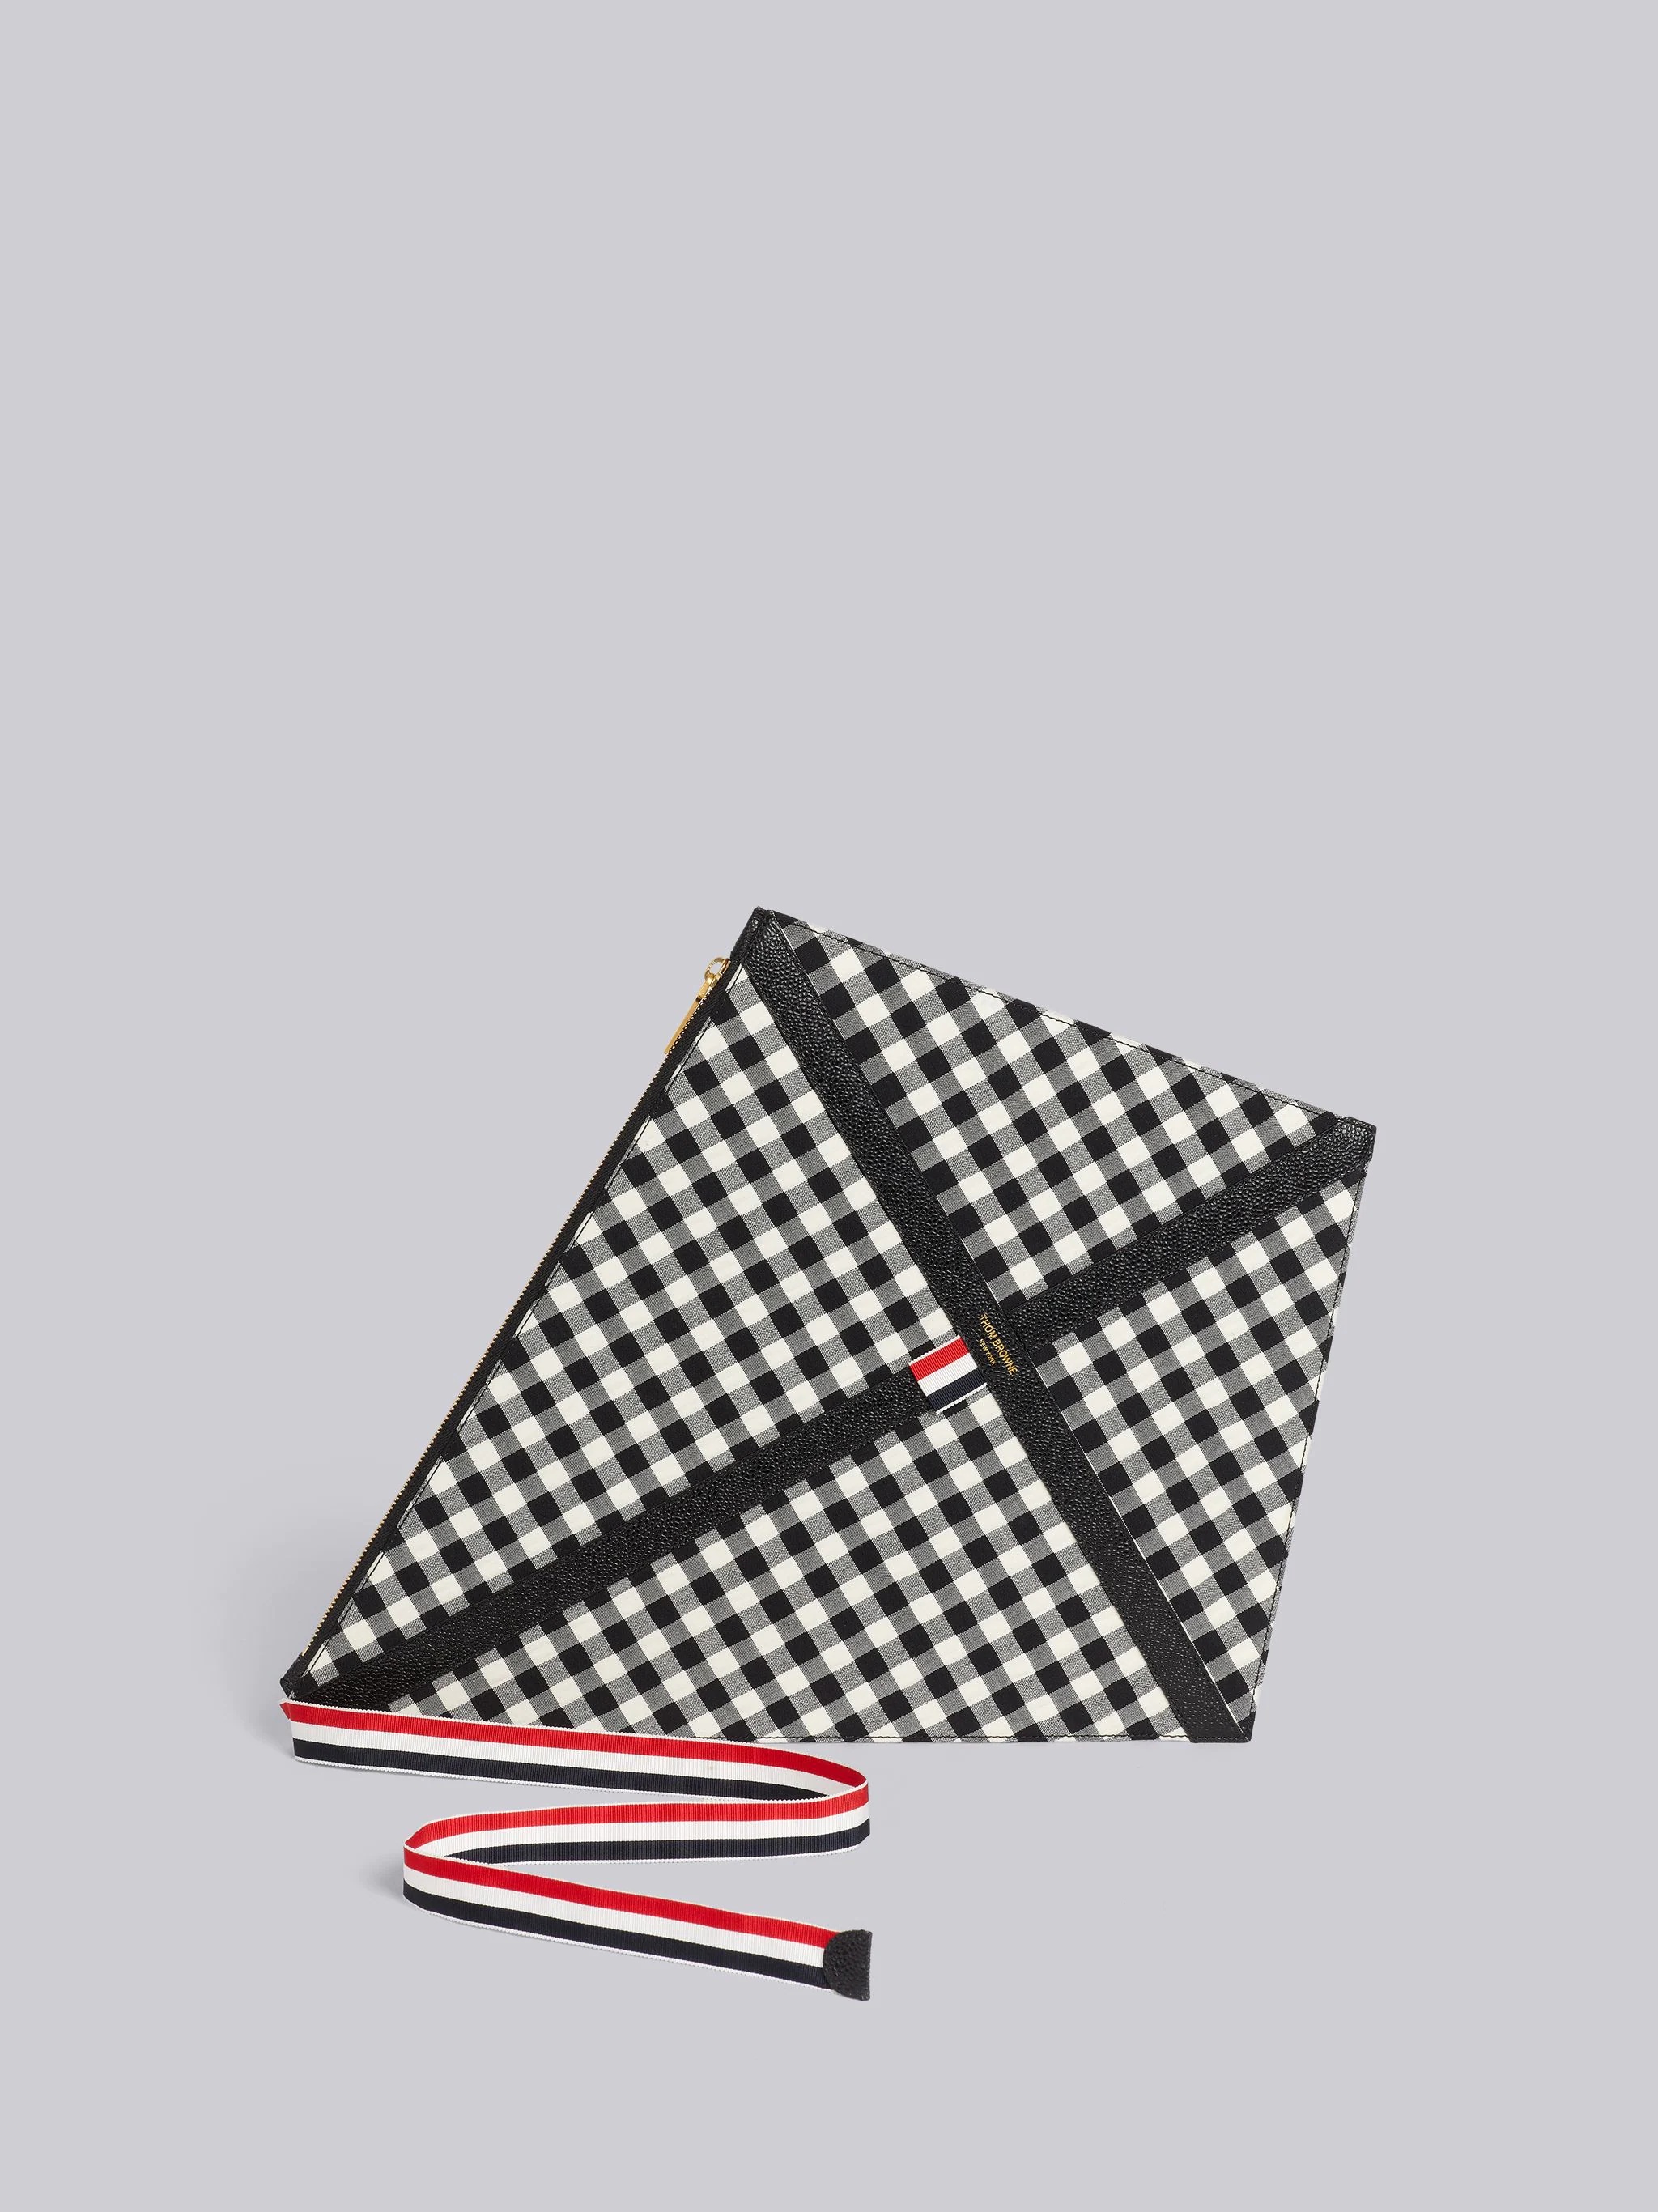 Black and White Gingham and Seersucker Wool Suiting Kite Bag - 1